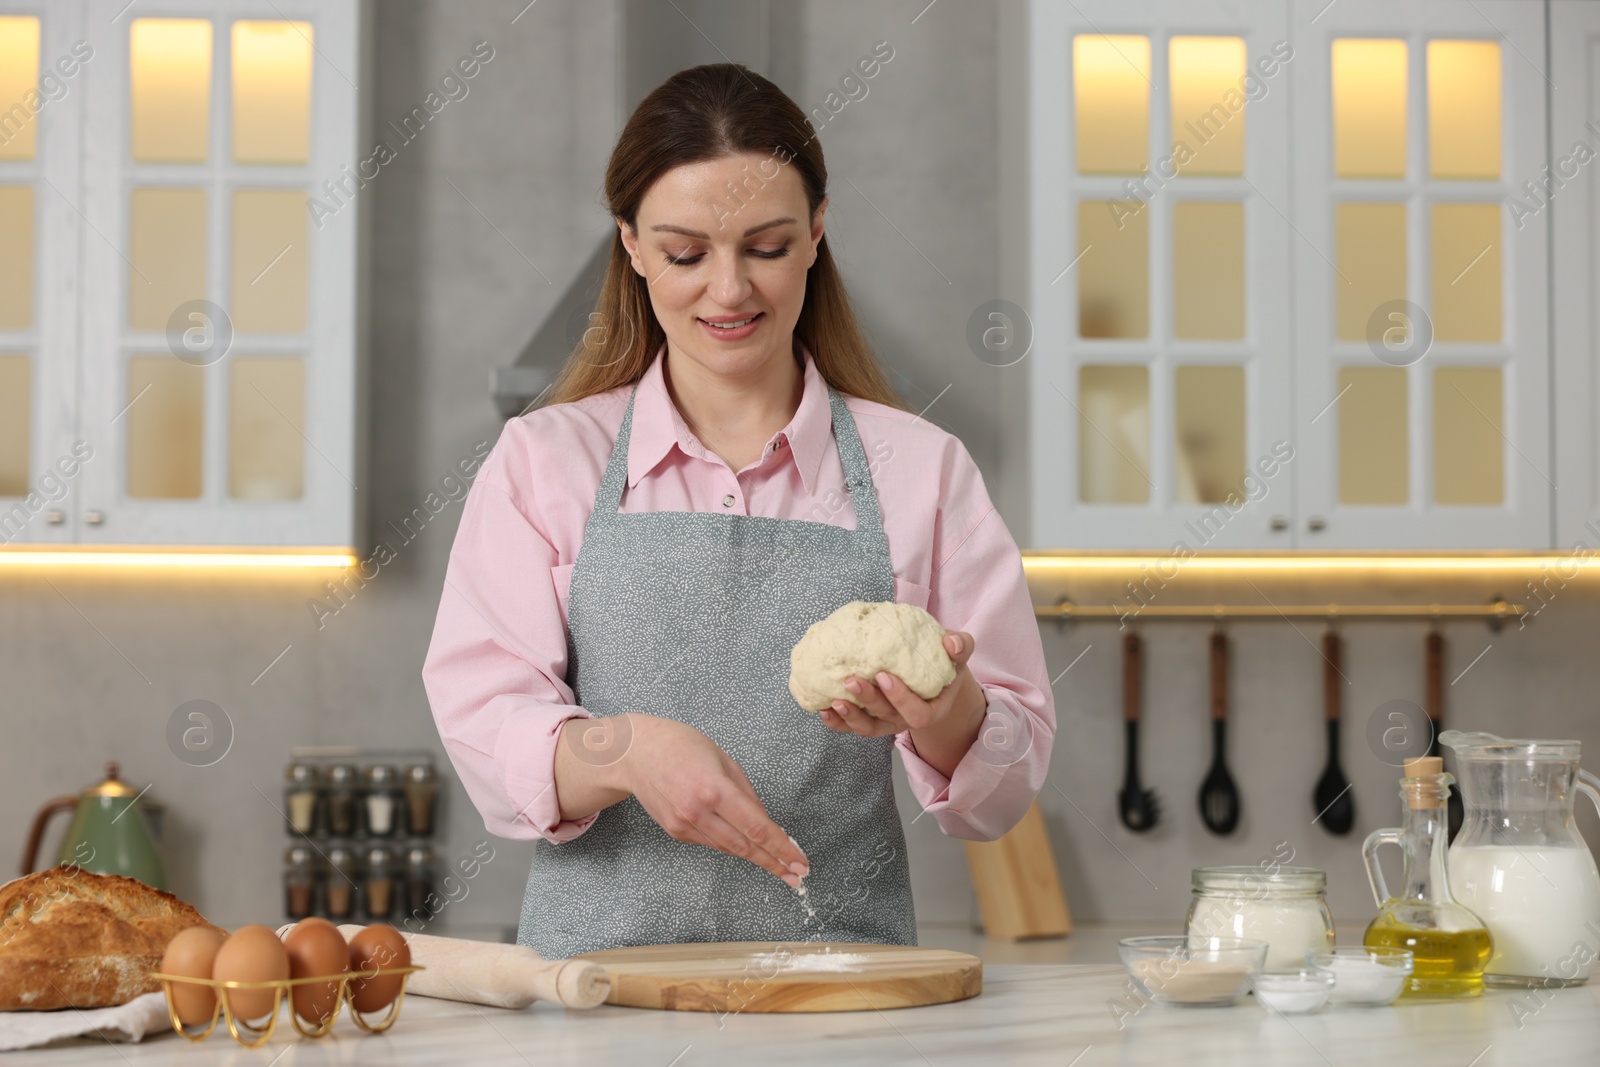 Photo of Making bread. Woman preparing raw dough at white table in kitchen